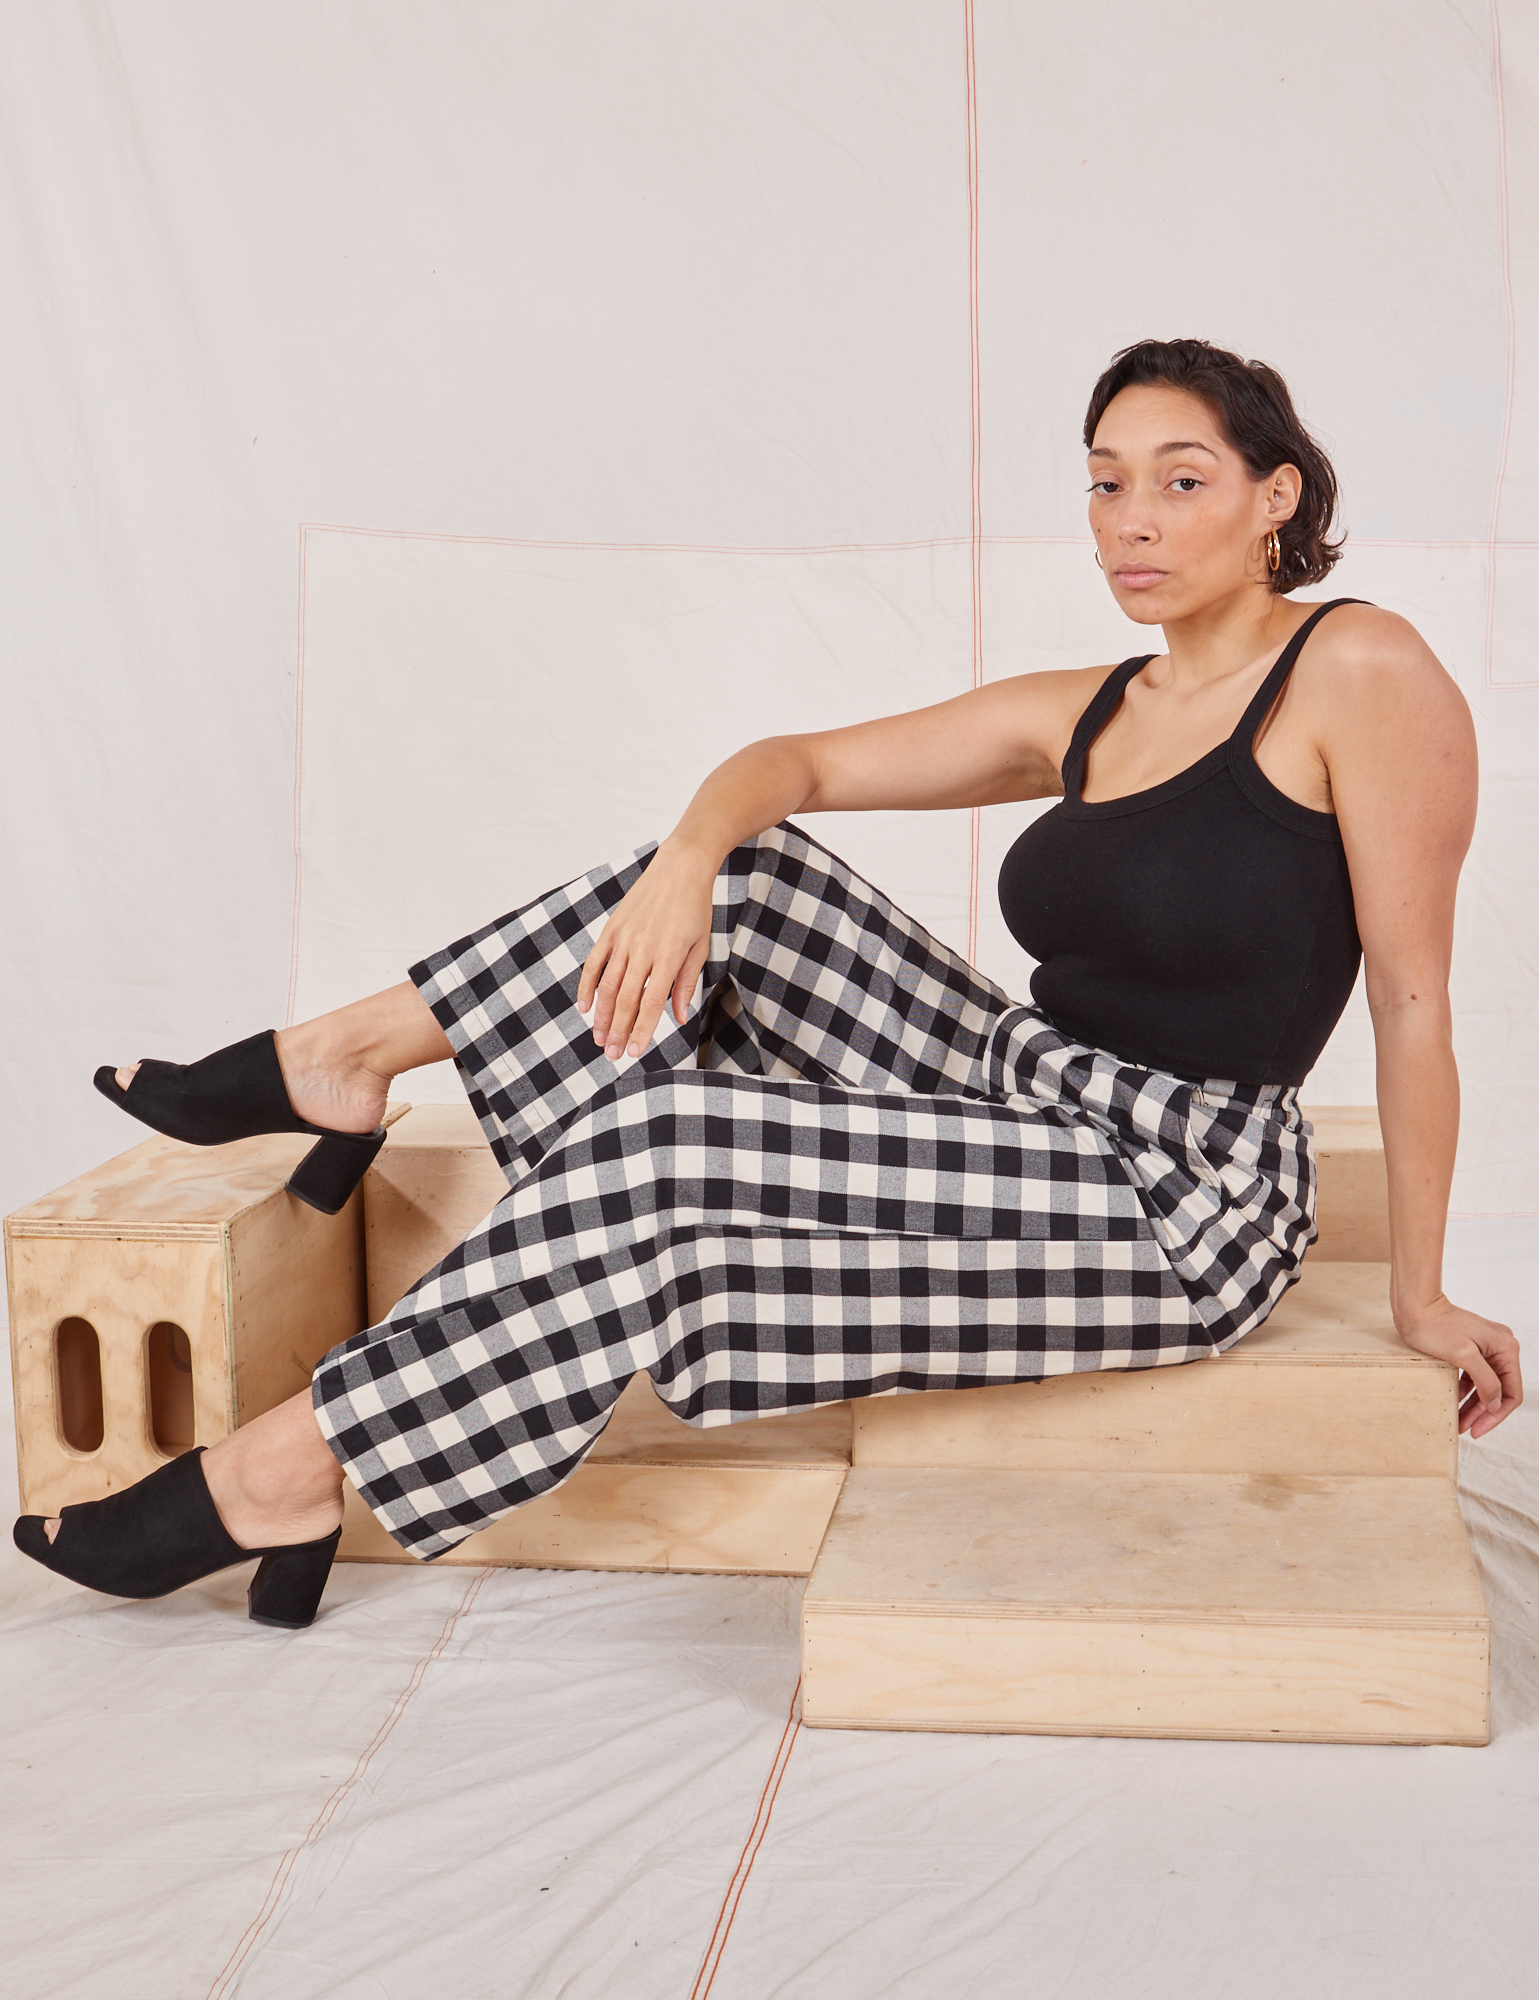 Tiara is wearing Wide Leg Trousers in Big Gingham and black Cropped Cami